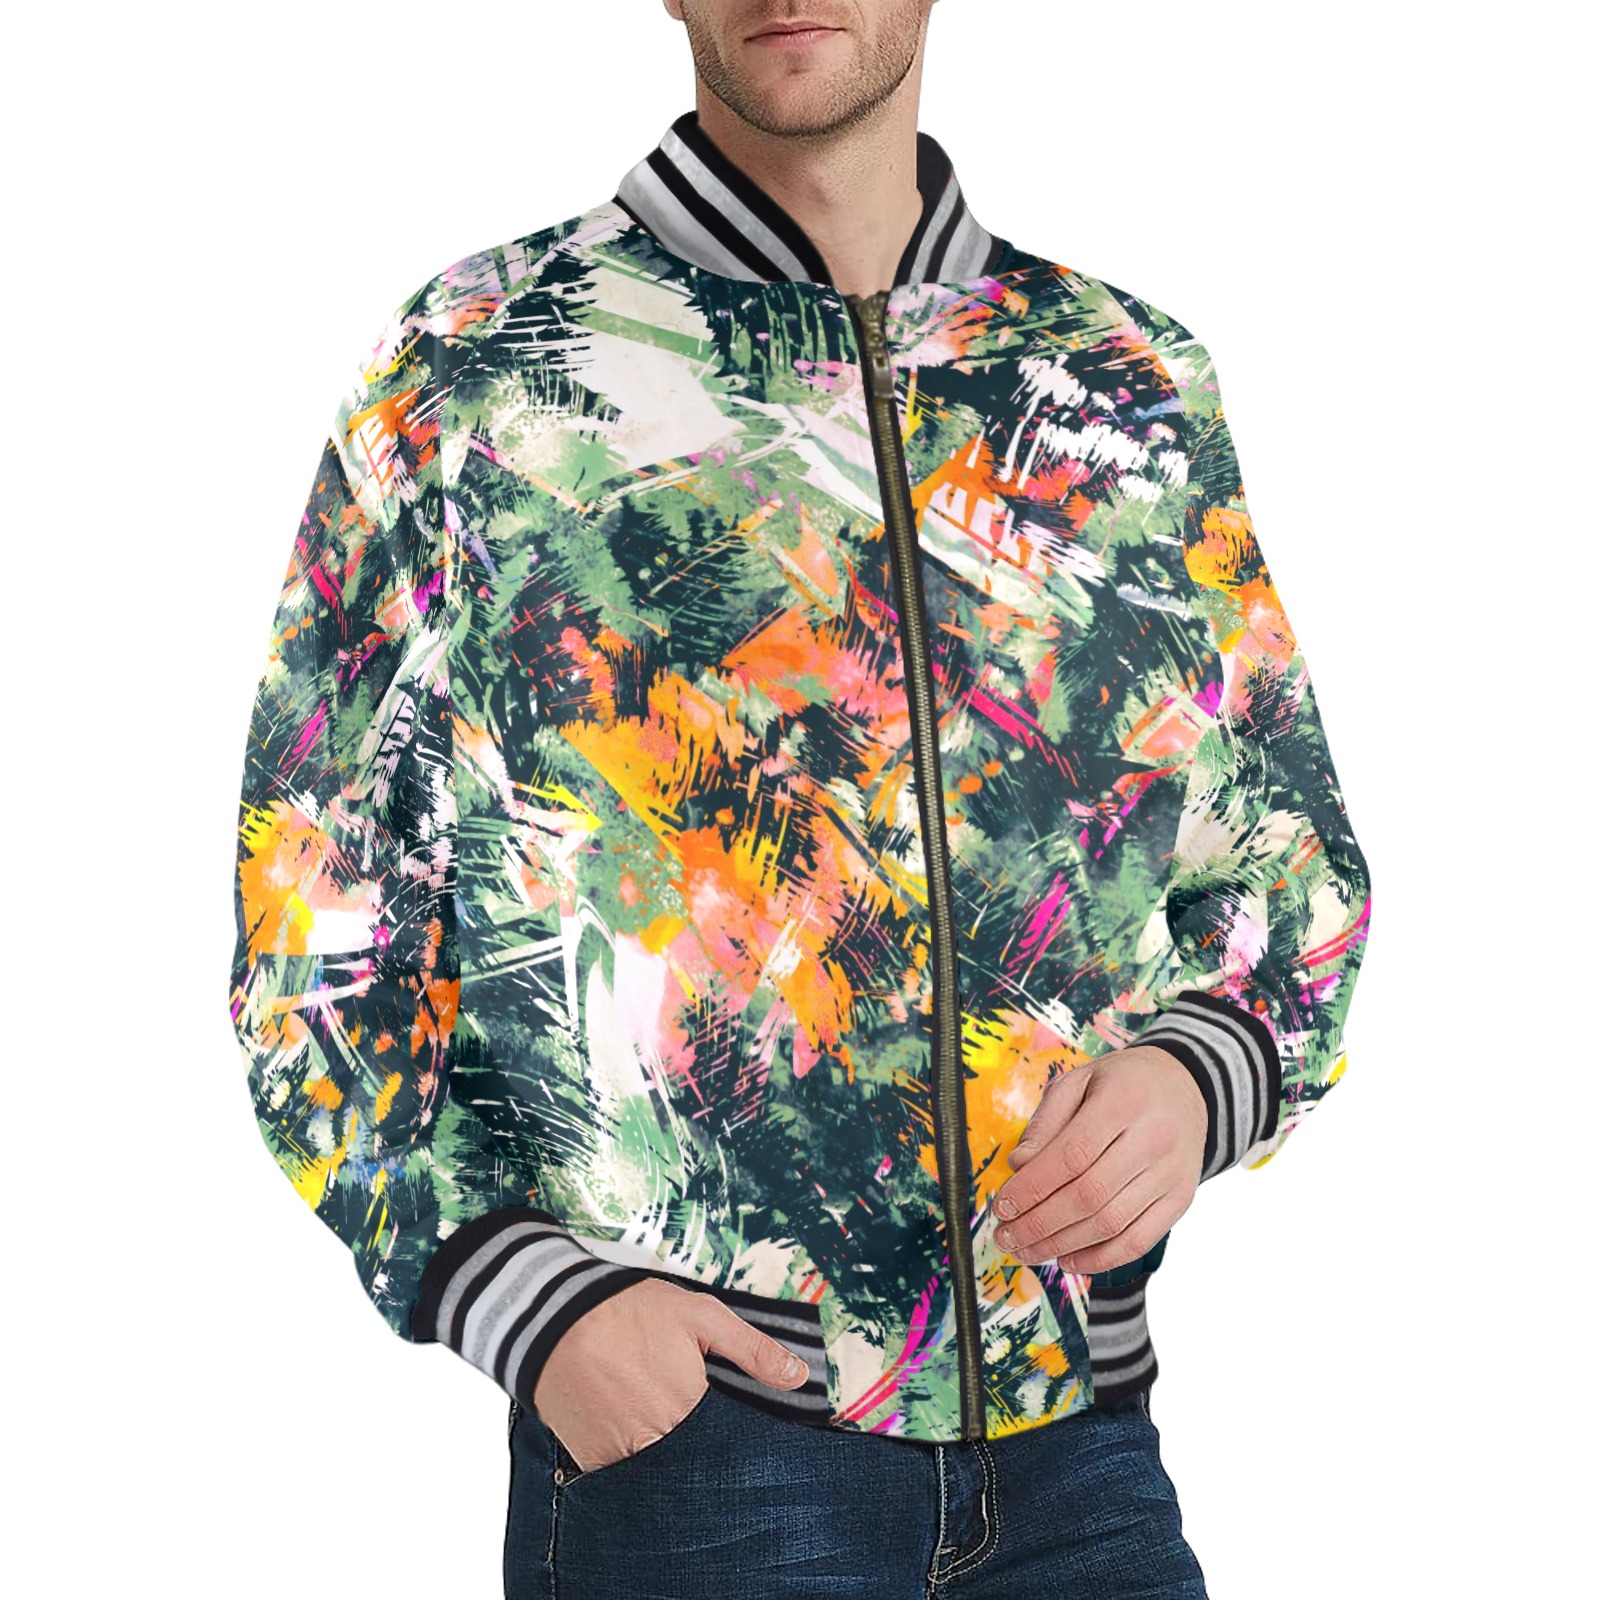 Colorful abstract brush strokes texture-0078 Men's Striped Trim Bomber Jacket (Model H21)